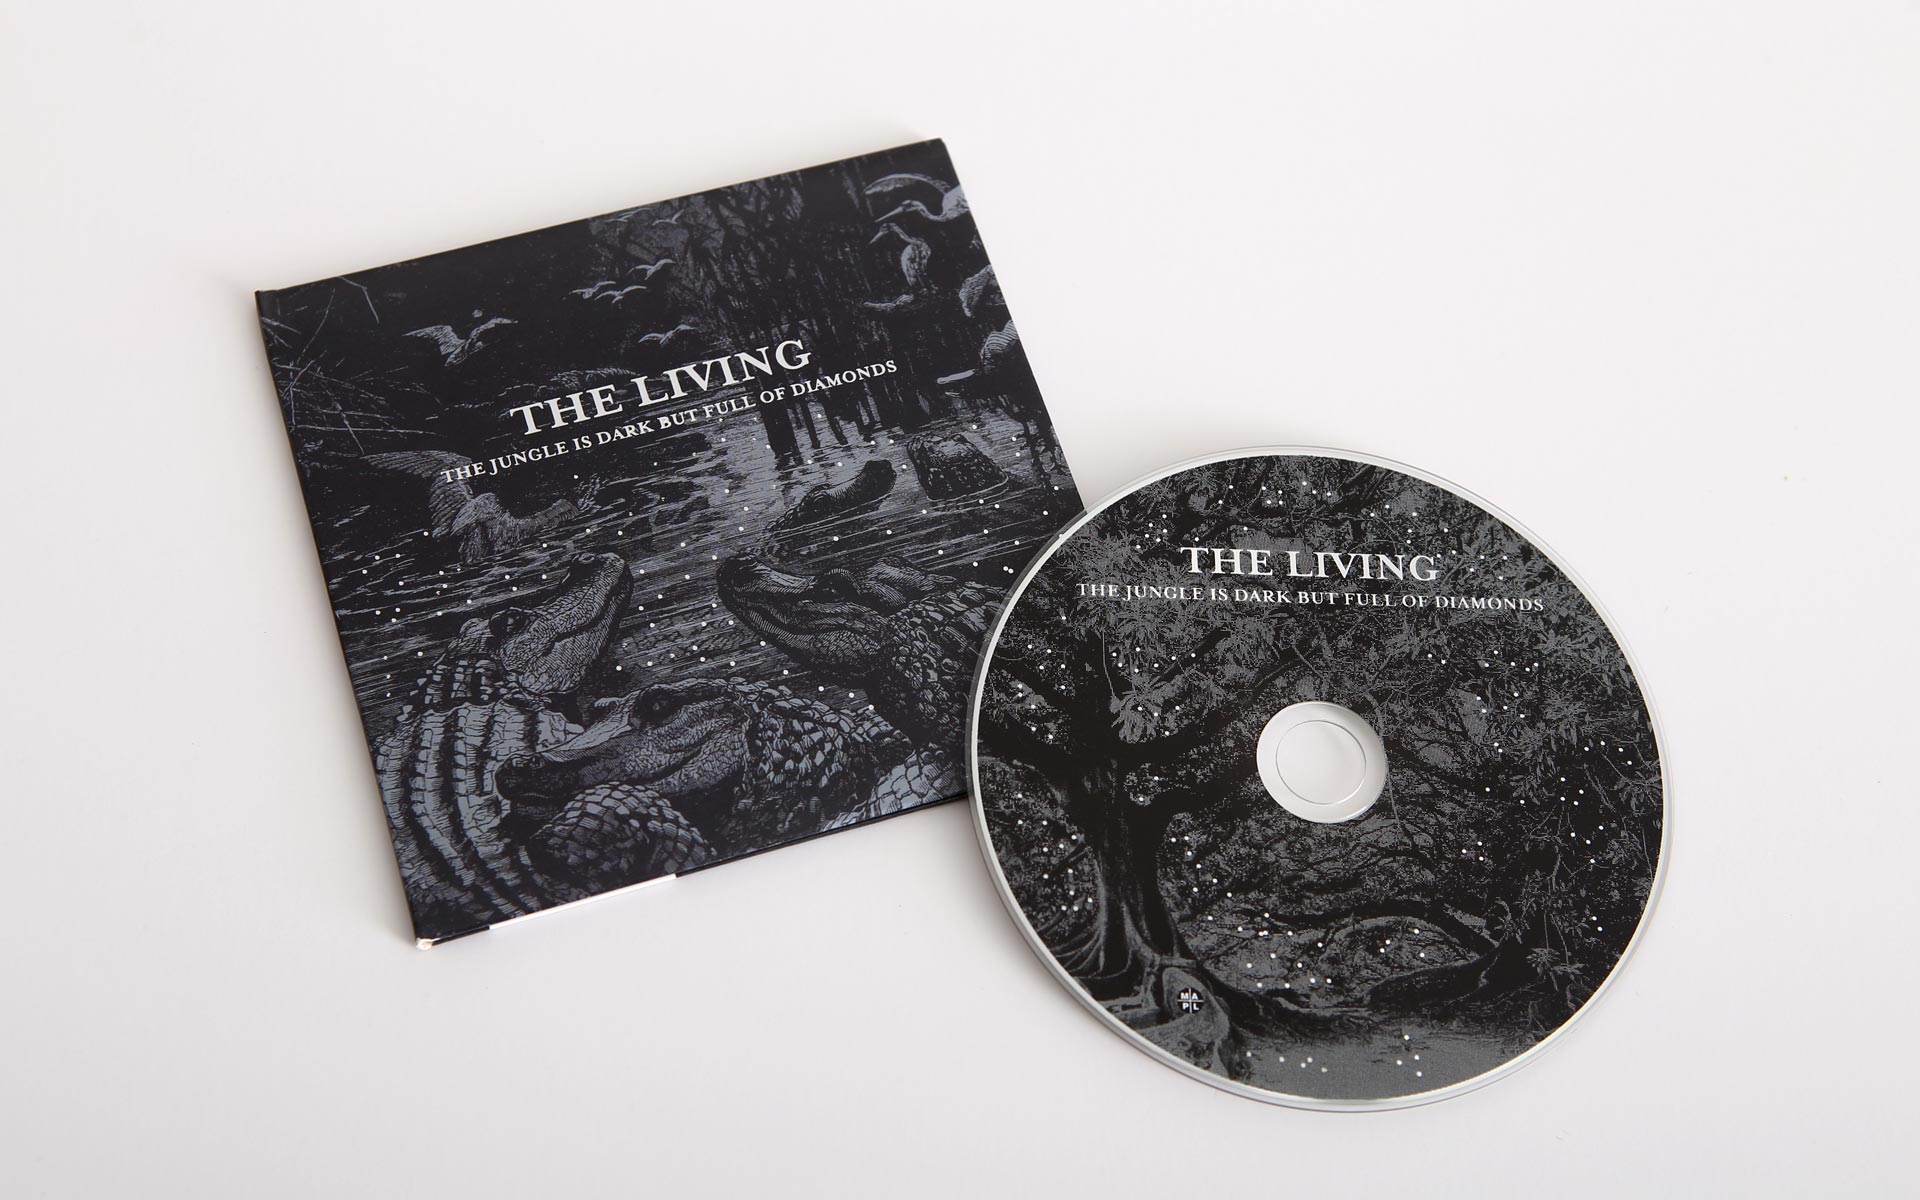 the-living-canada-band-cd-design-1